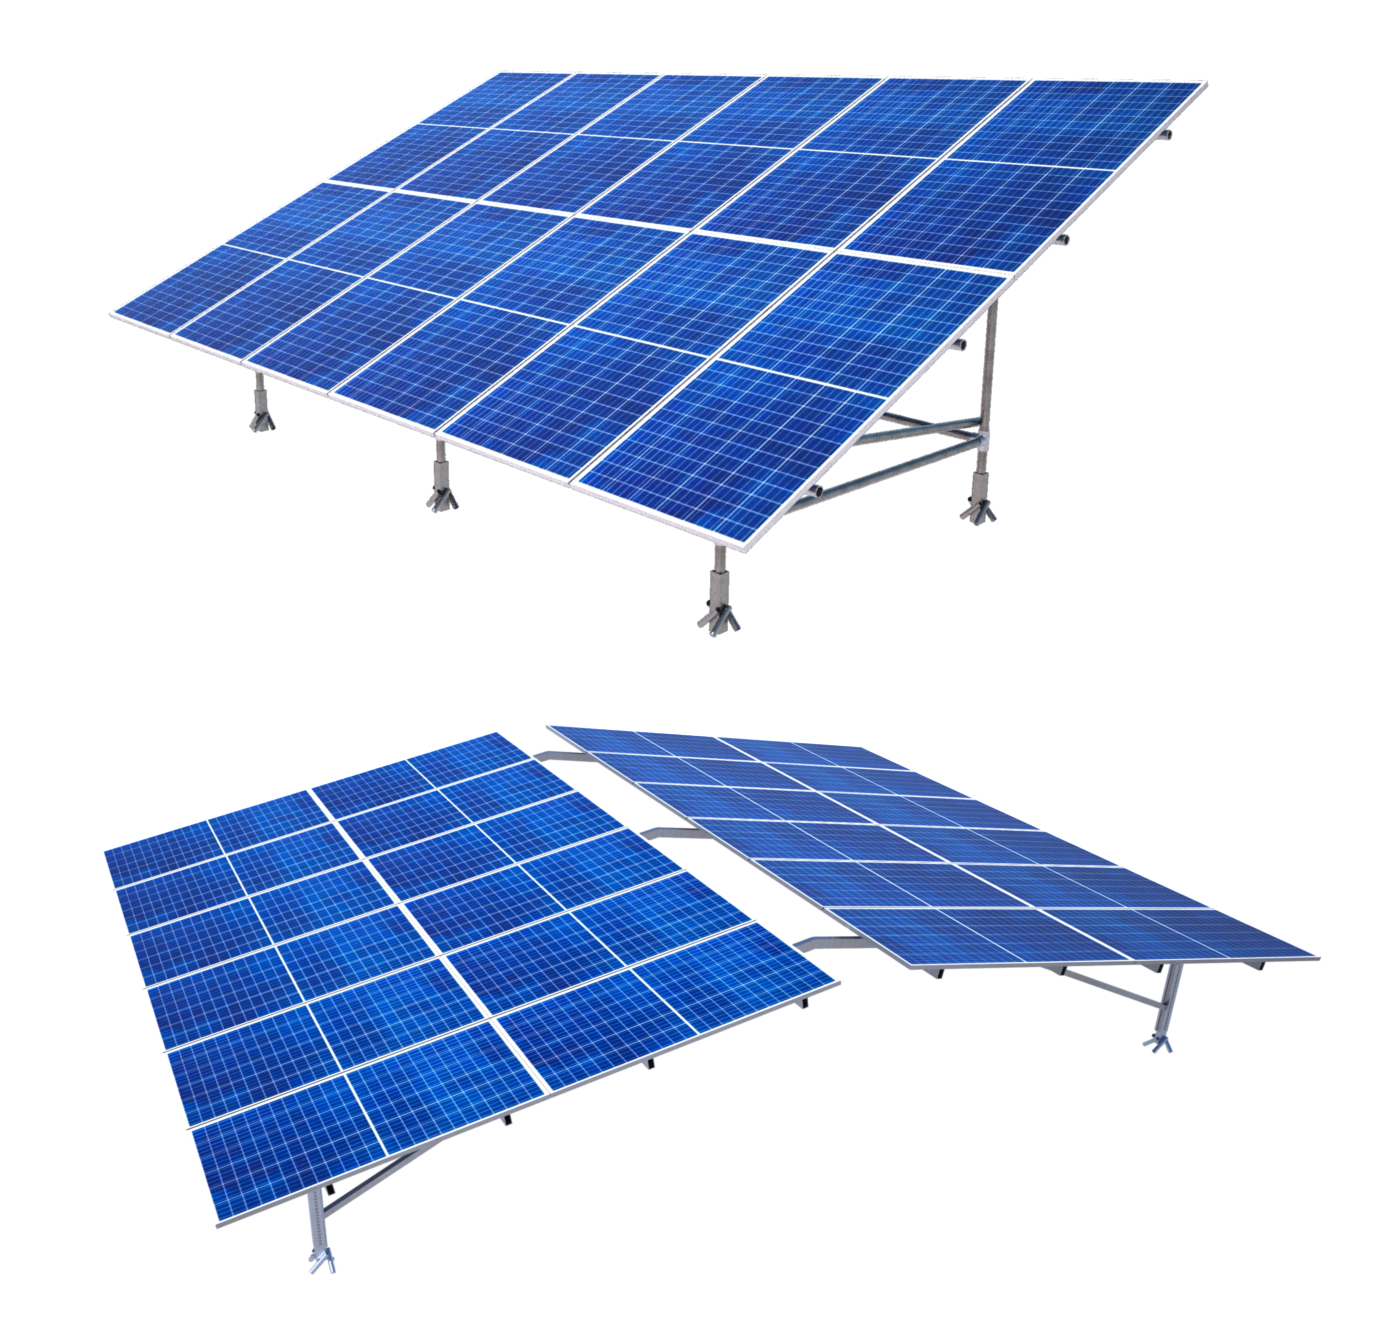 Solar Power PNG Image File